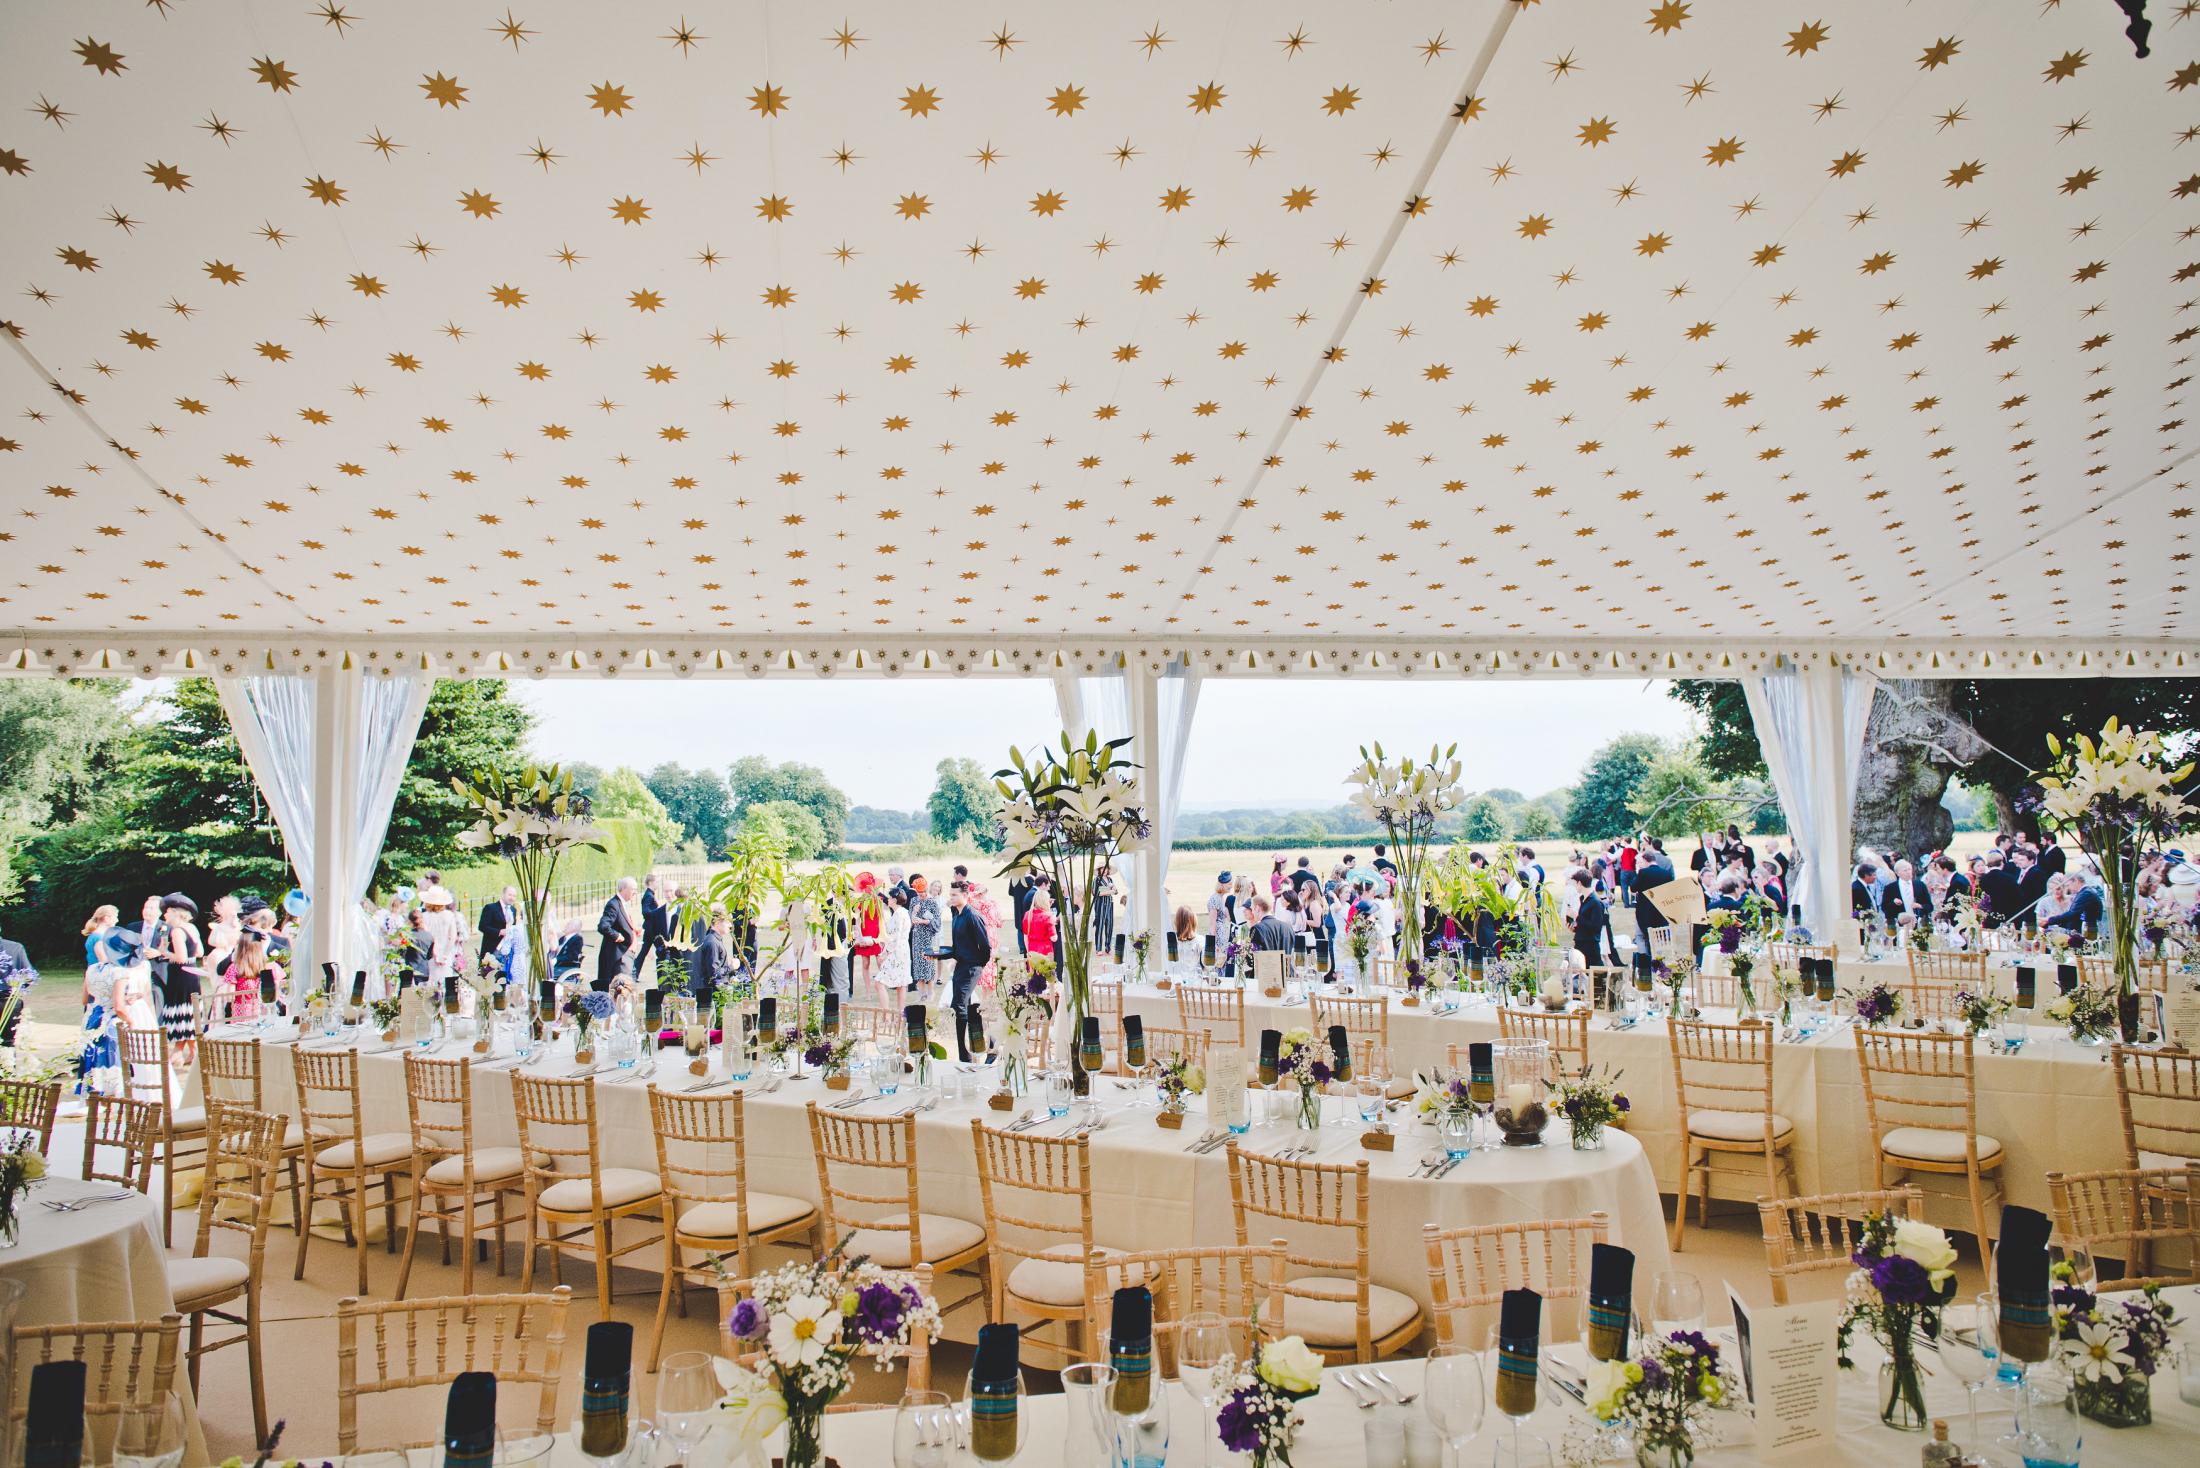 Unique Lining design for Covered Occasions Marquees